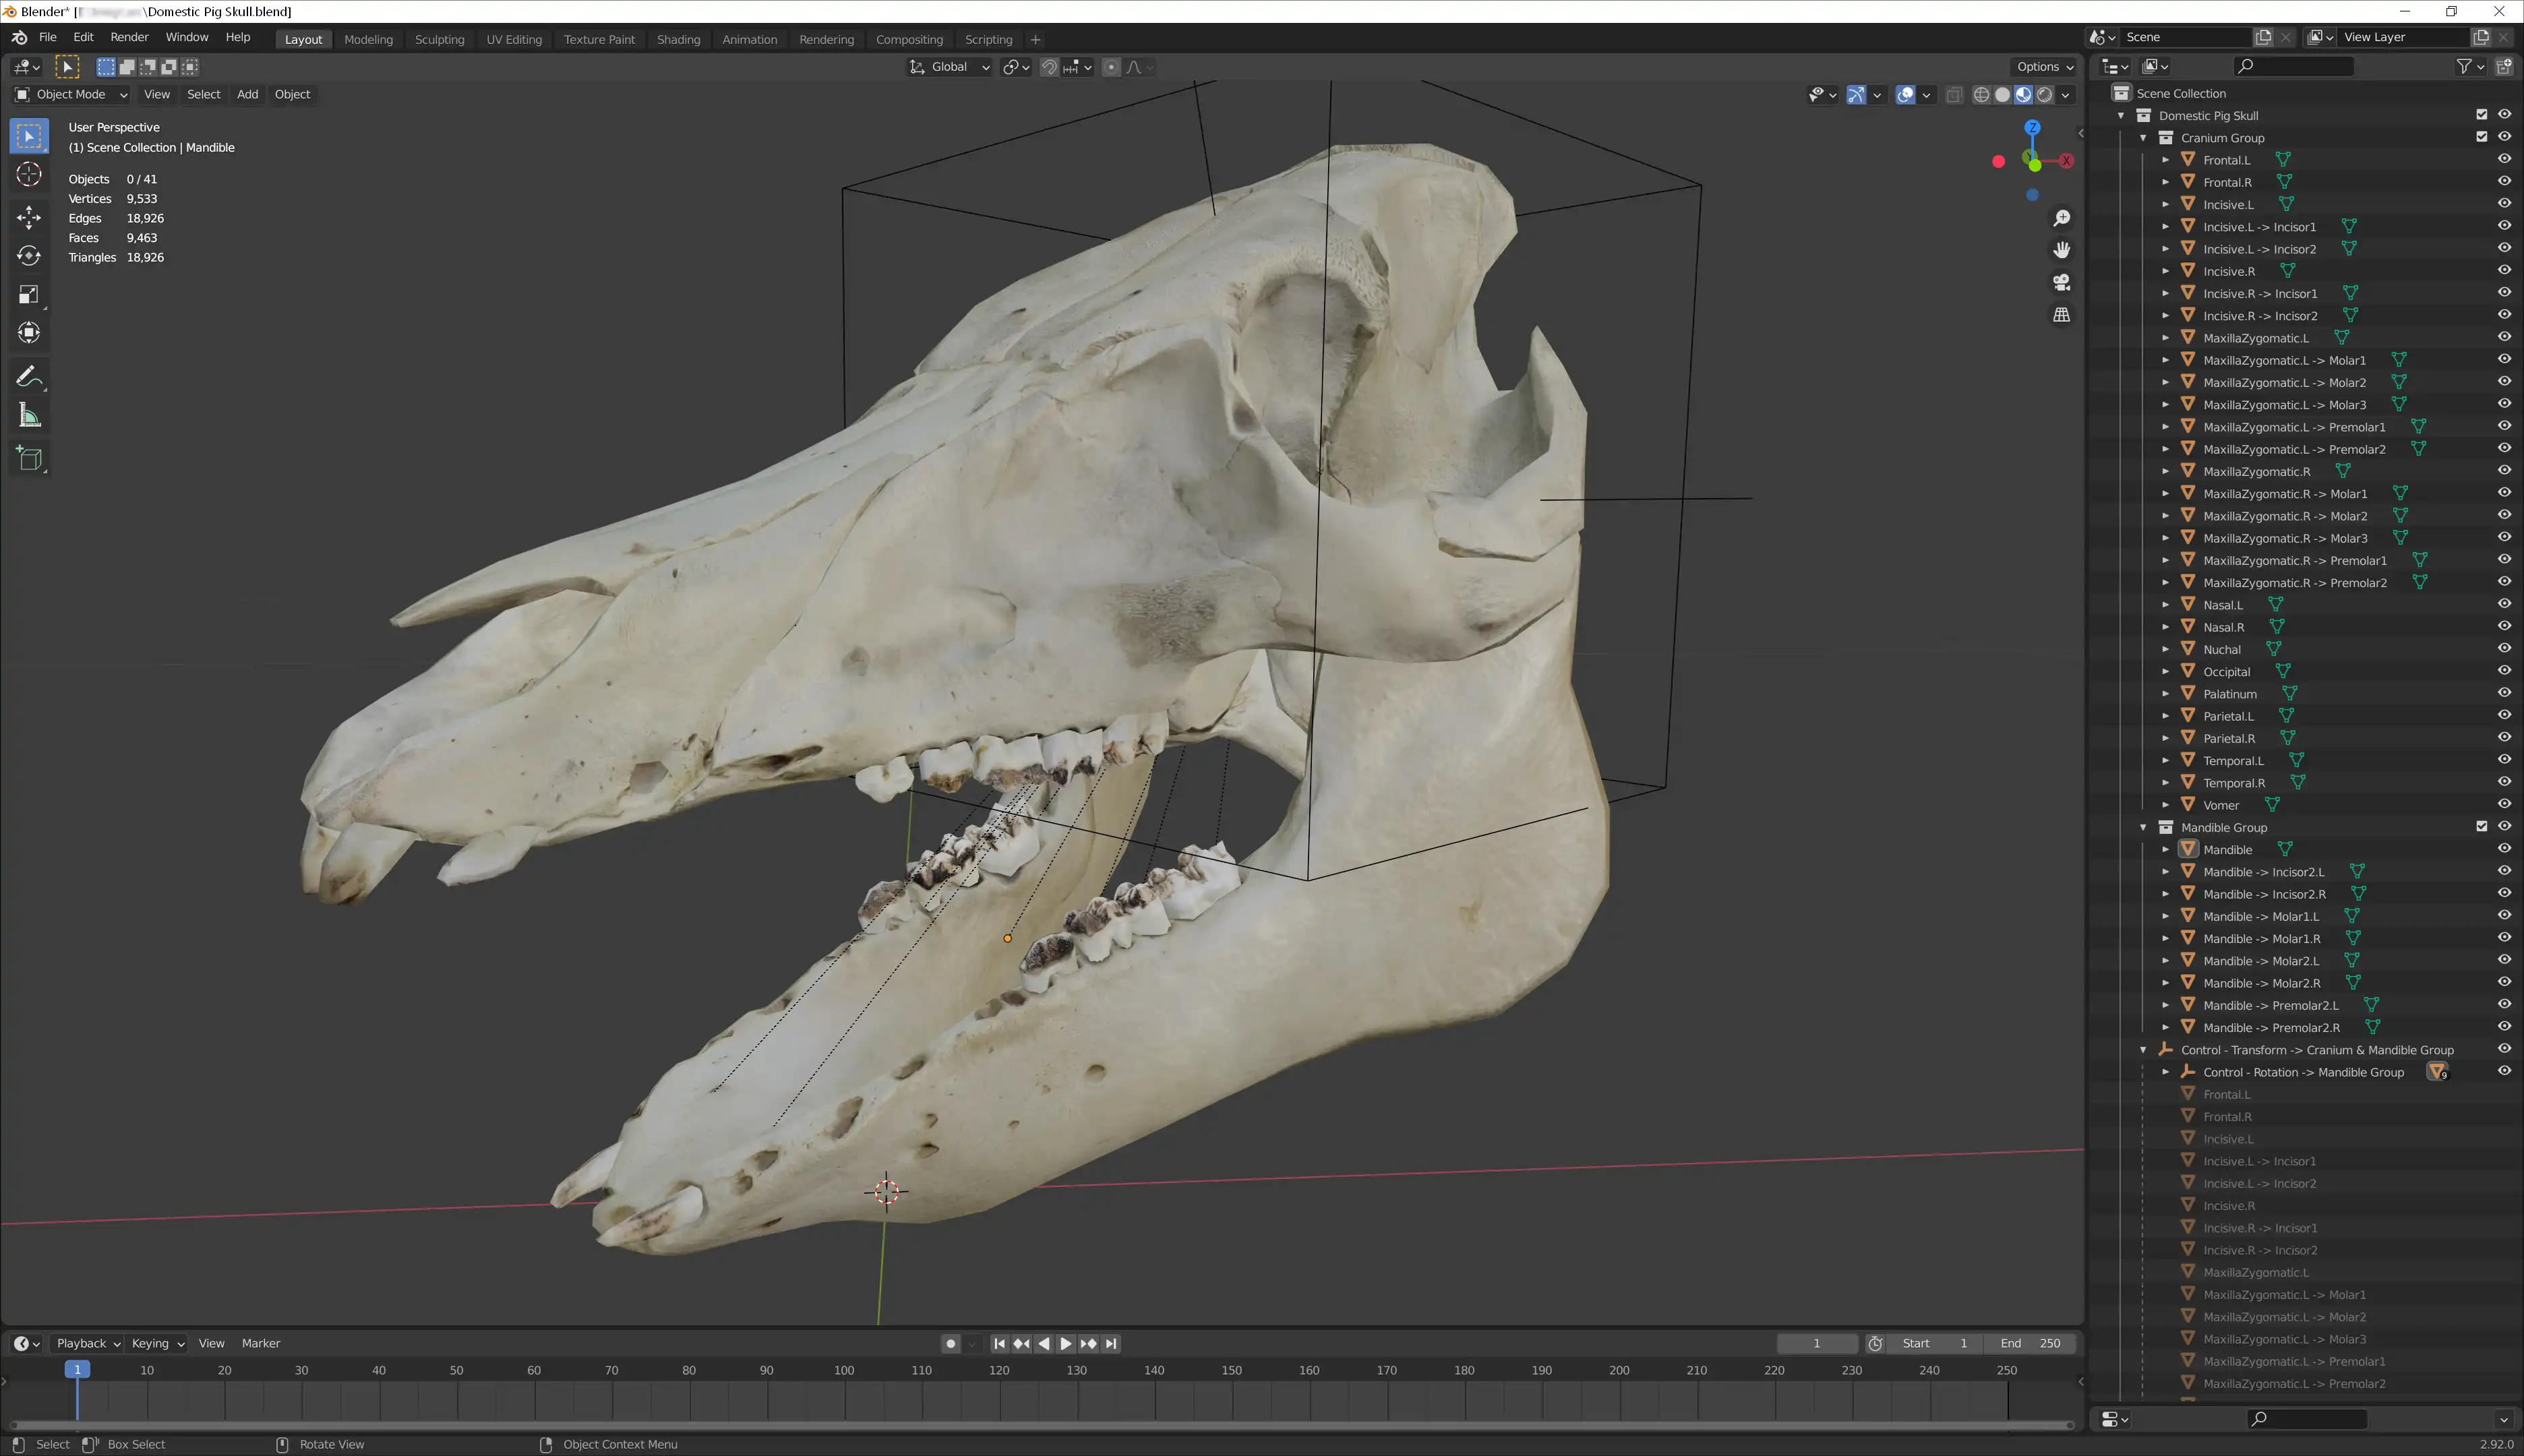 A screenshot of the Blender interface showing the 3D model of a pig skull.